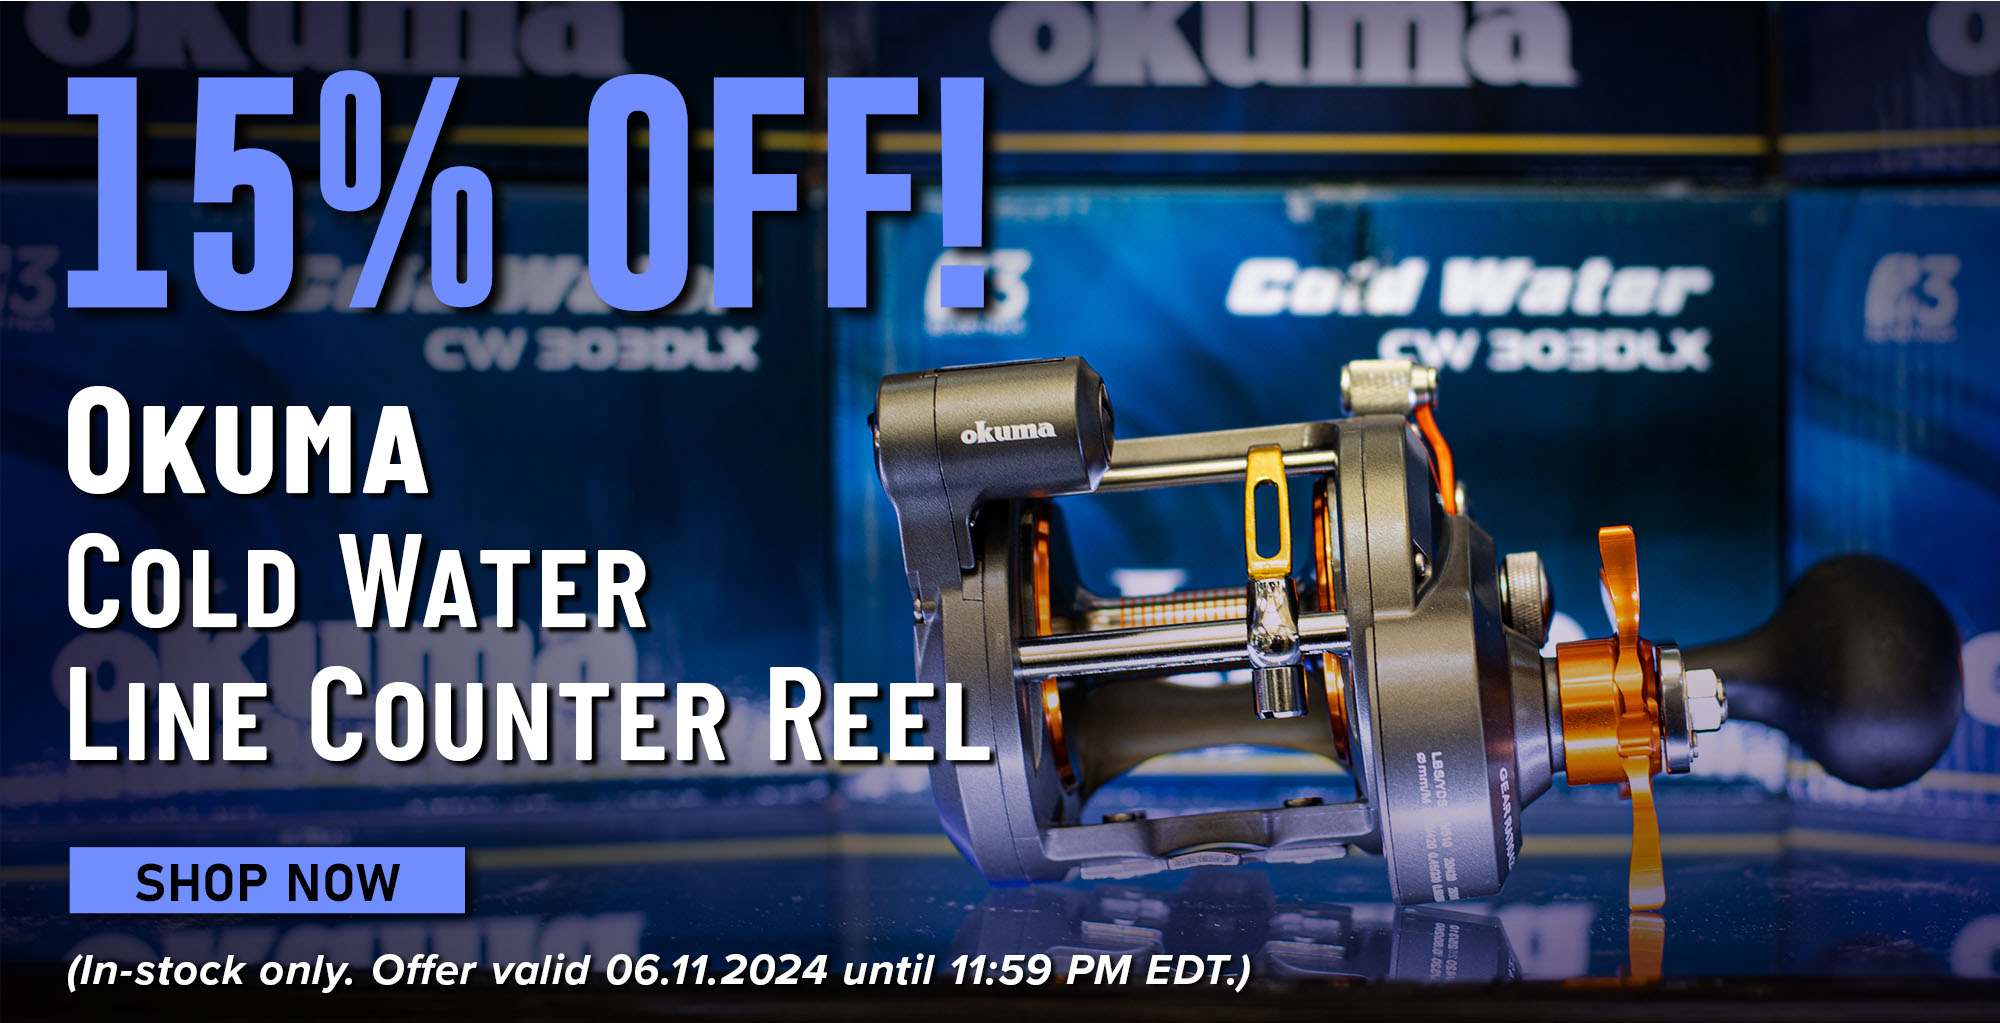 15% Off! Okuma Cold Water Line Counter Reel Shop Now (In-stock only. Offer valid 06.11.2024 until 11:59 PM EDT.)